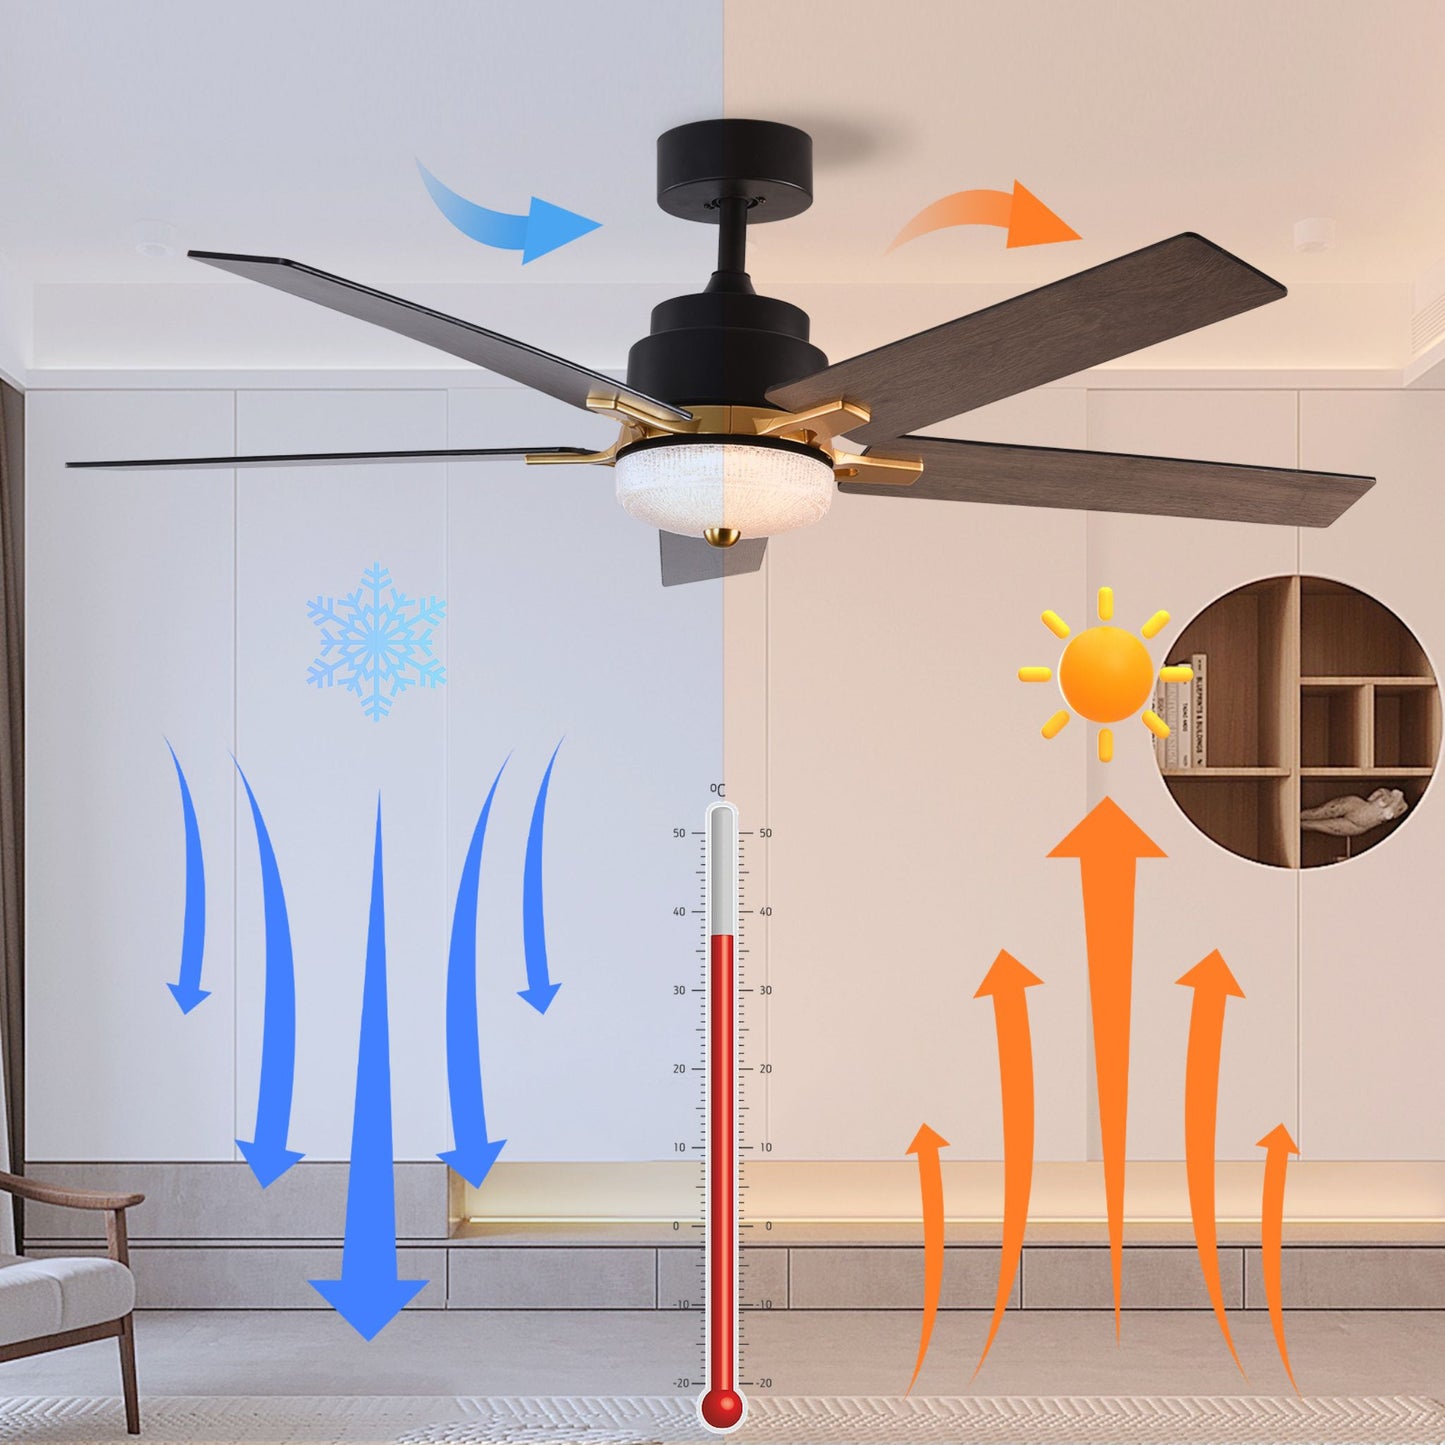 52" Luxury Dimmable Remote Control Integrated Light Ceiling Fan